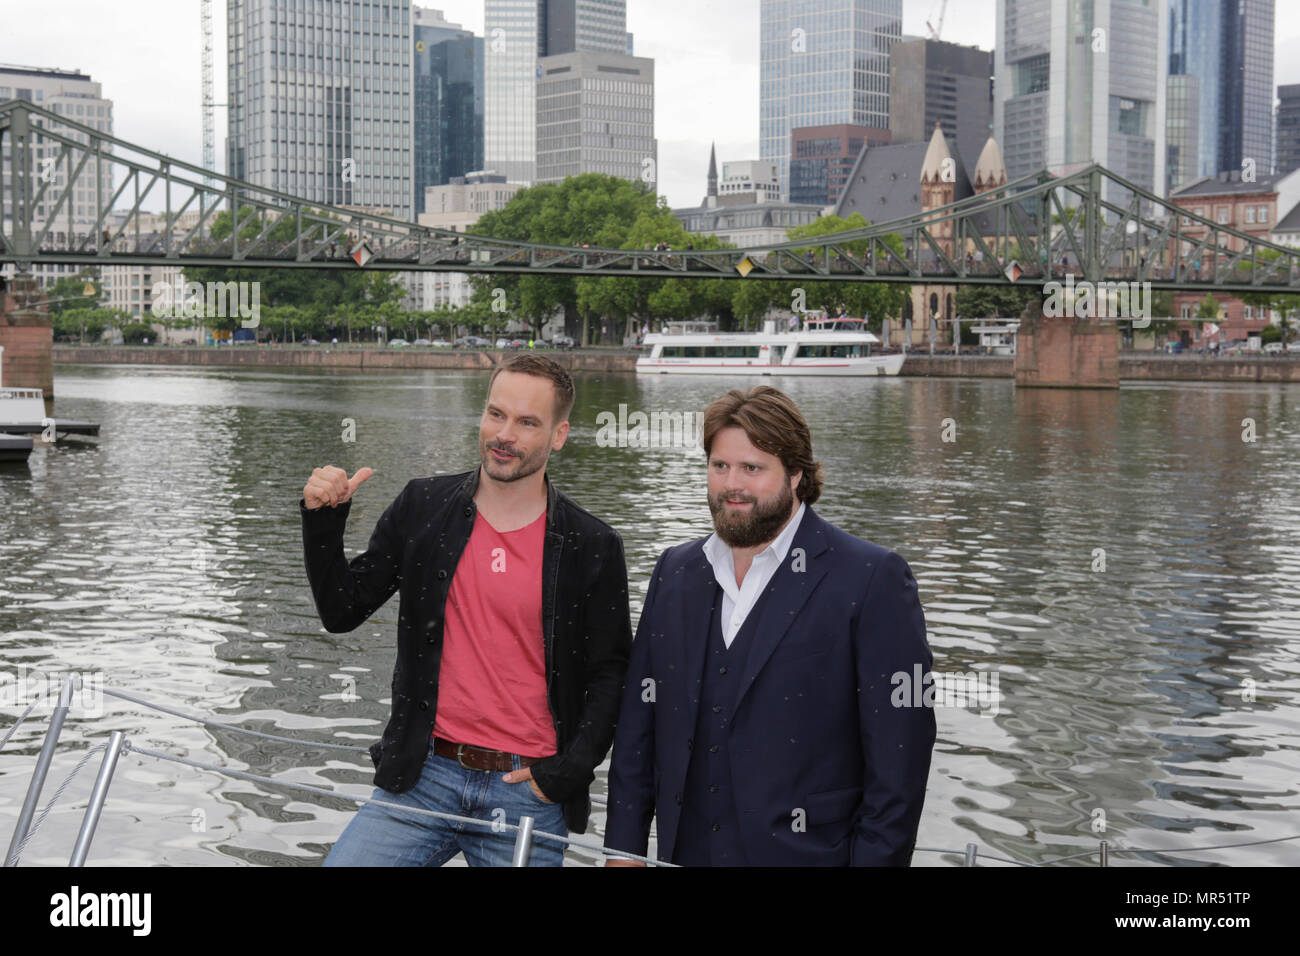 Actors Wanja Mues (left) and Antoine Monot, Jr. (right) pose on the gangway of the houseboat that is owned by Mues' character Leo in the TV show. 4 new episodes of the relaunch of the long running TV series 'Ein Fall fuer zwei’ (A case for two) are being filmed in Frankfurt for the German state TV broadcaster ZDF (Zweites Deutsches Fernsehen). It stars Antoine Monot, Jr. as defence attorney Benjamin ‘Benni’ Hornberg and Wanja Mues as private investigator Leo Oswald. The episodes are directed by Thomas Nennstiel. The episodes are set to air in October. (Photo by Michael Debets / Pacific Press) Stock Photo